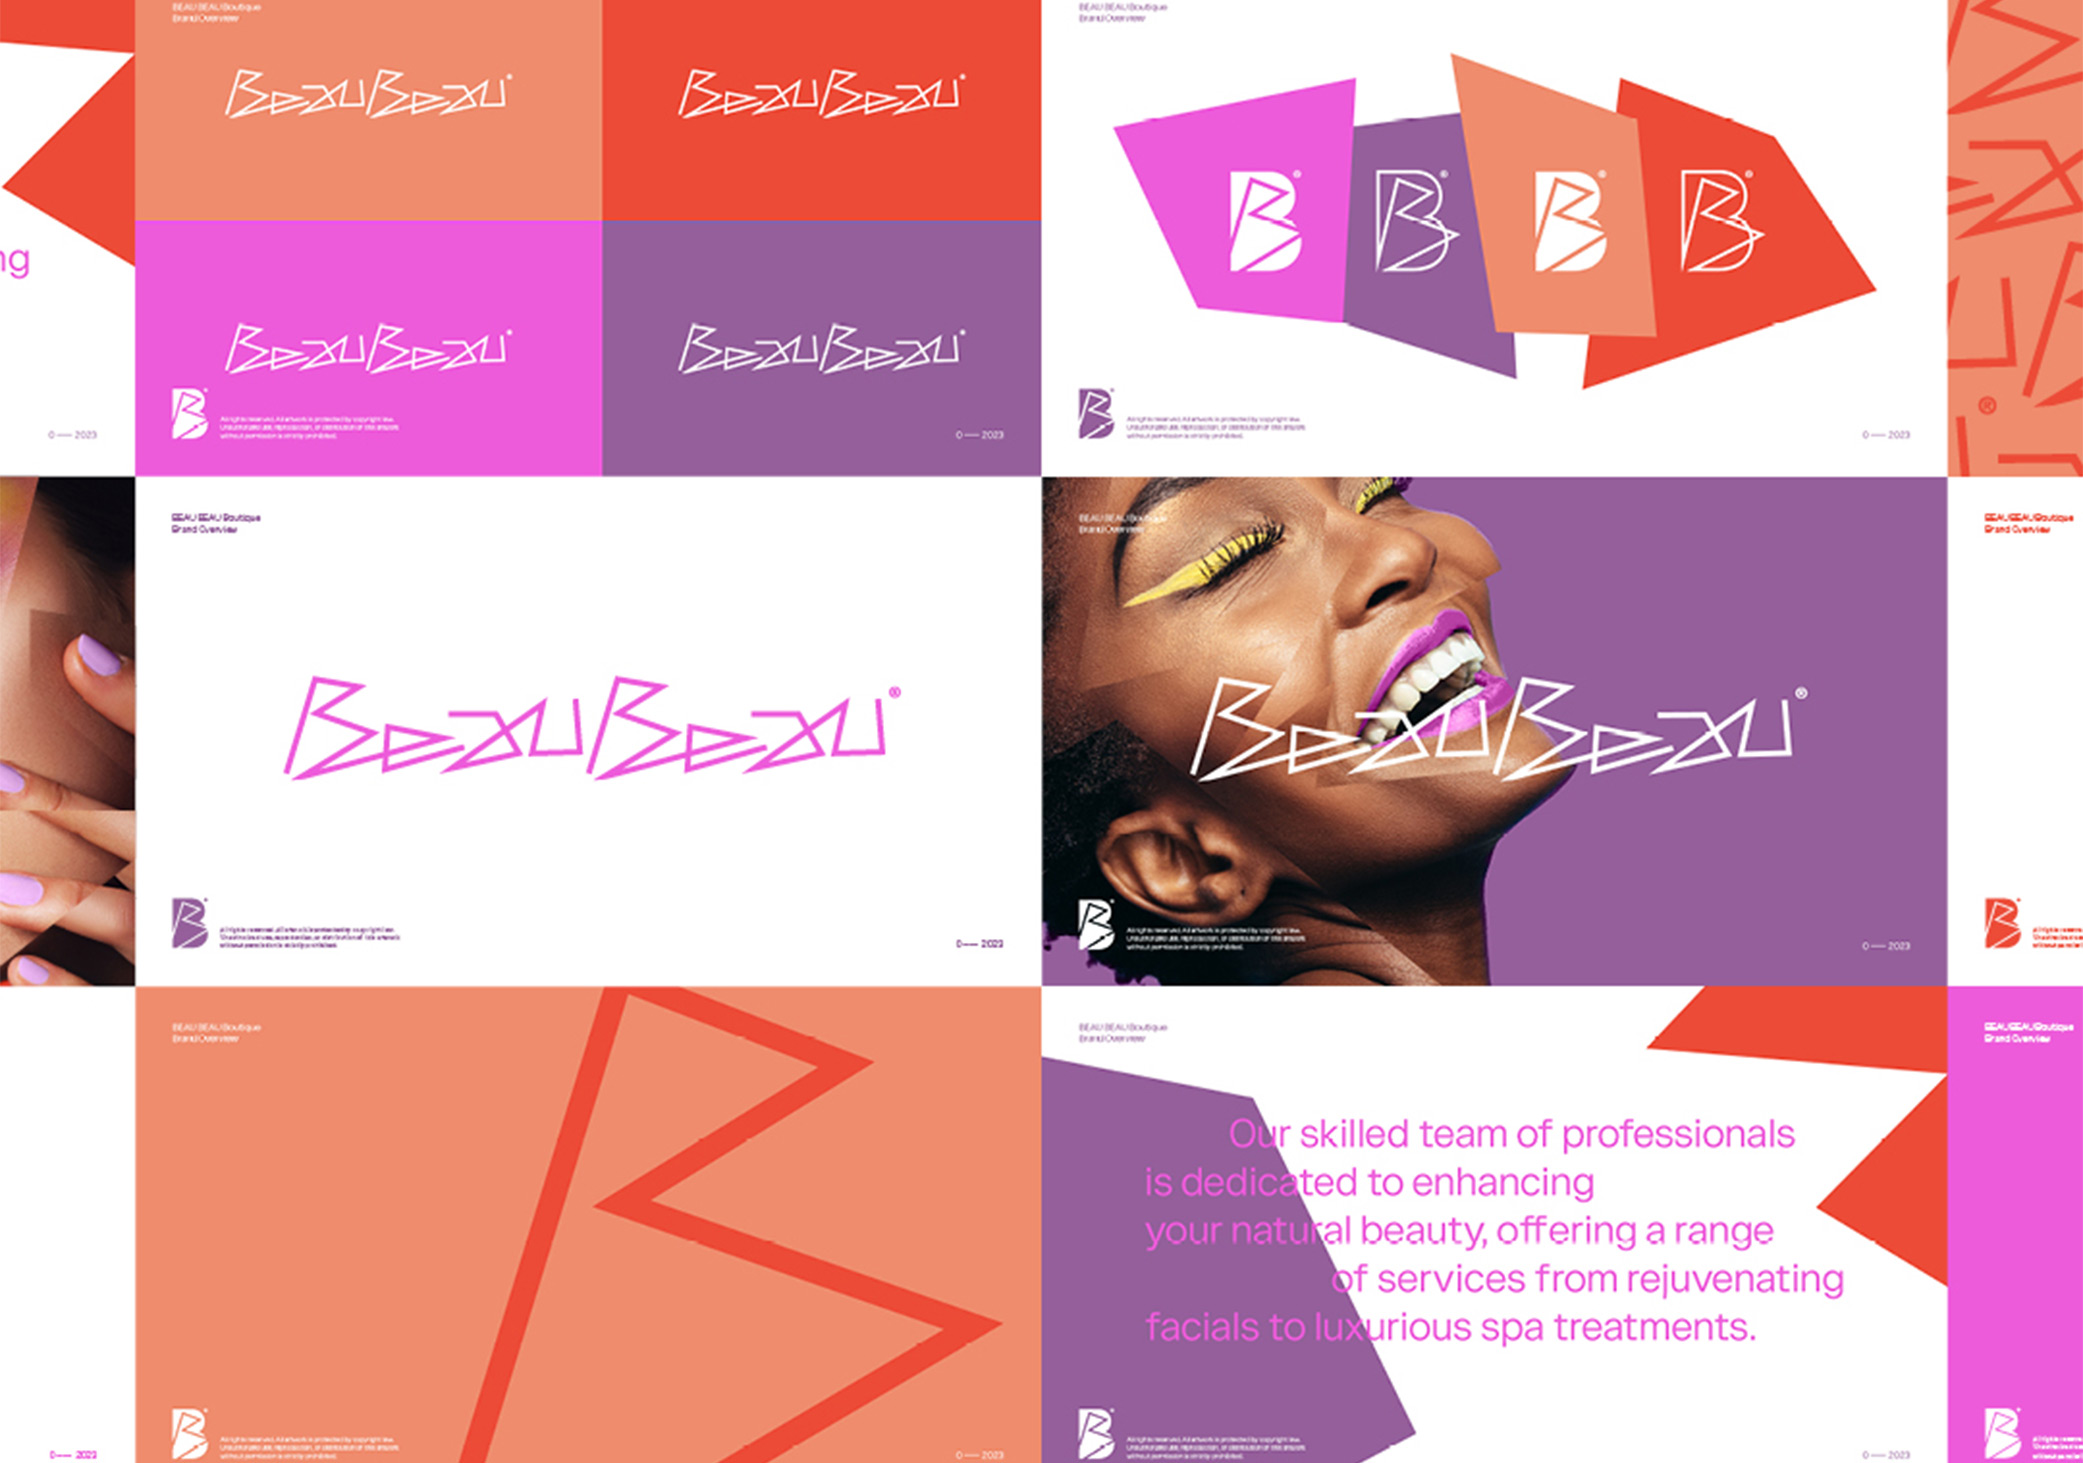 Brand guidelines overview with branding elements, colour palettes, imagery and icons for Beau Beau